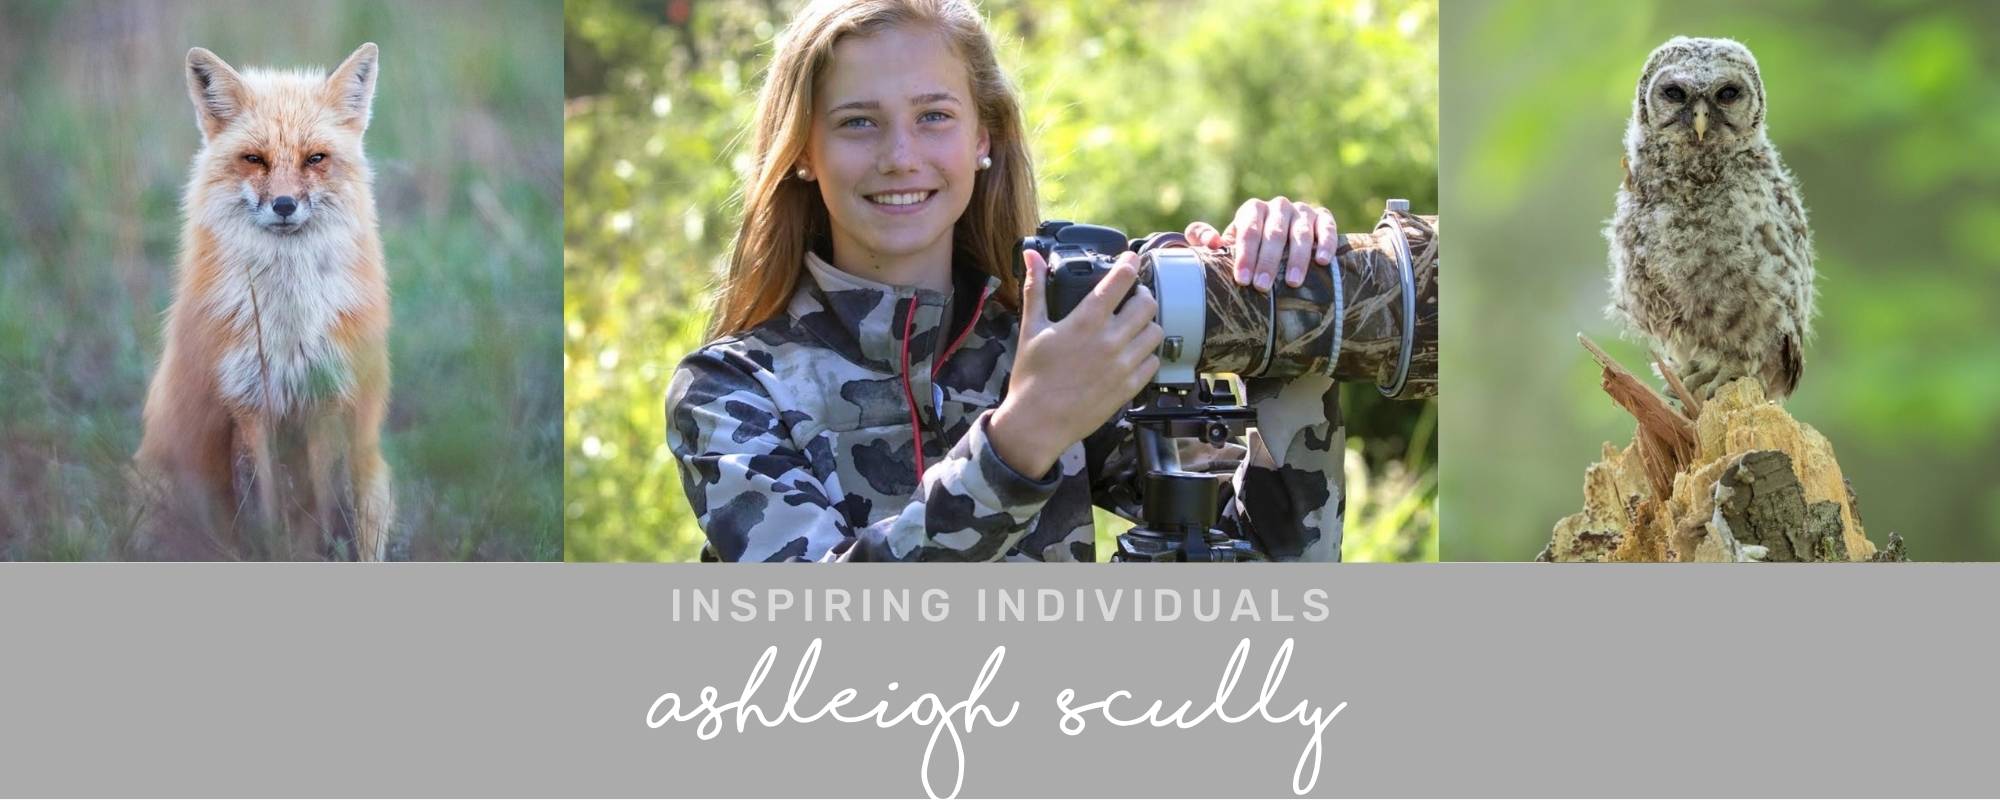 INSPIRING INDIVIDUAL: Ashleigh Scully